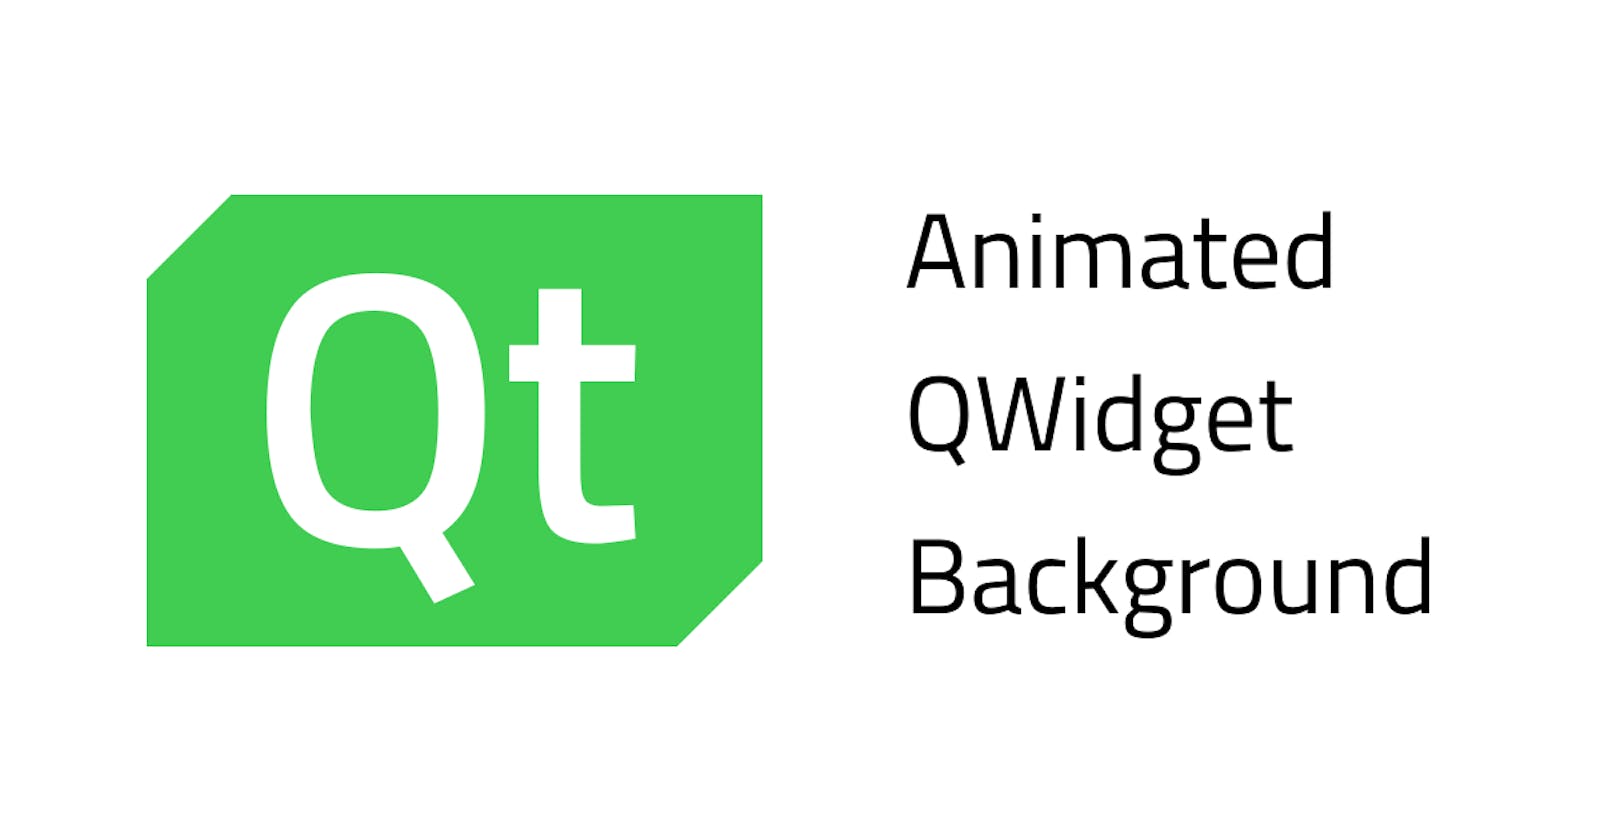 How to animate QWidget’s background using a GIF